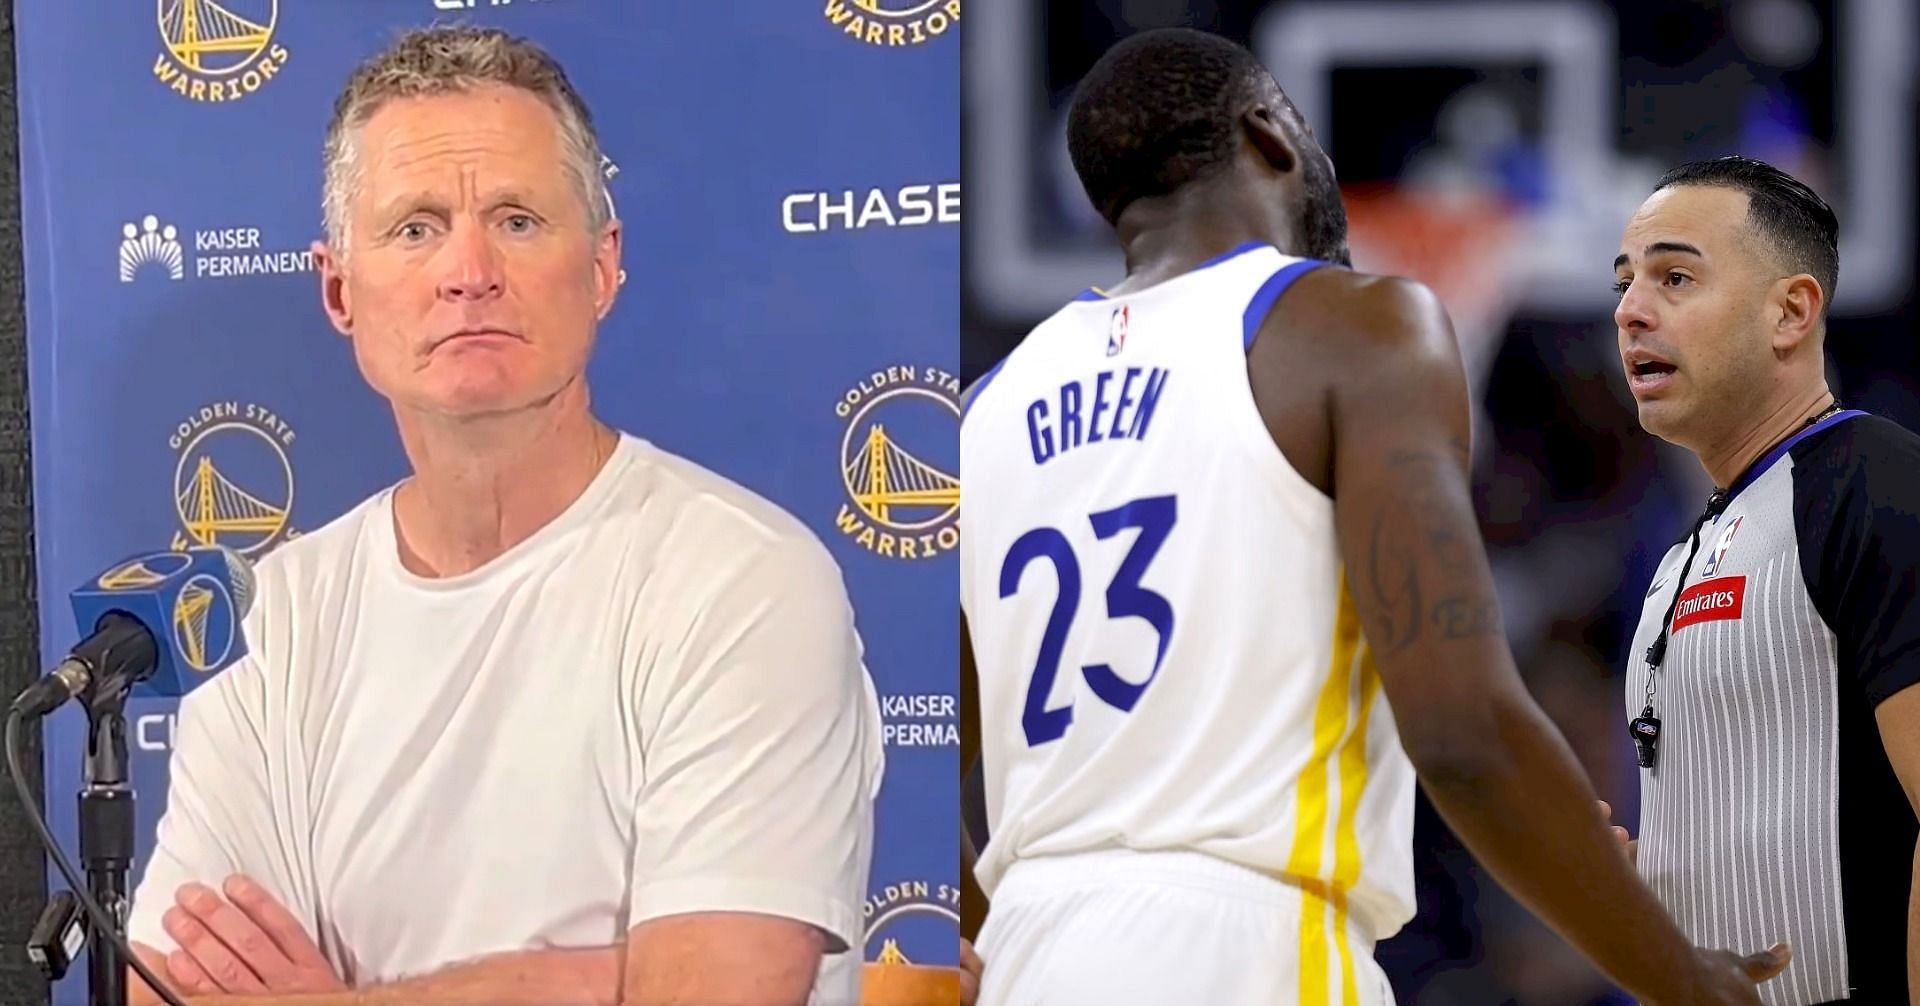 Steve Kerr doesn&rsquo;t mince words after Draymond Green&rsquo;s latest ejection: &ldquo;He deserved it&rdquo;